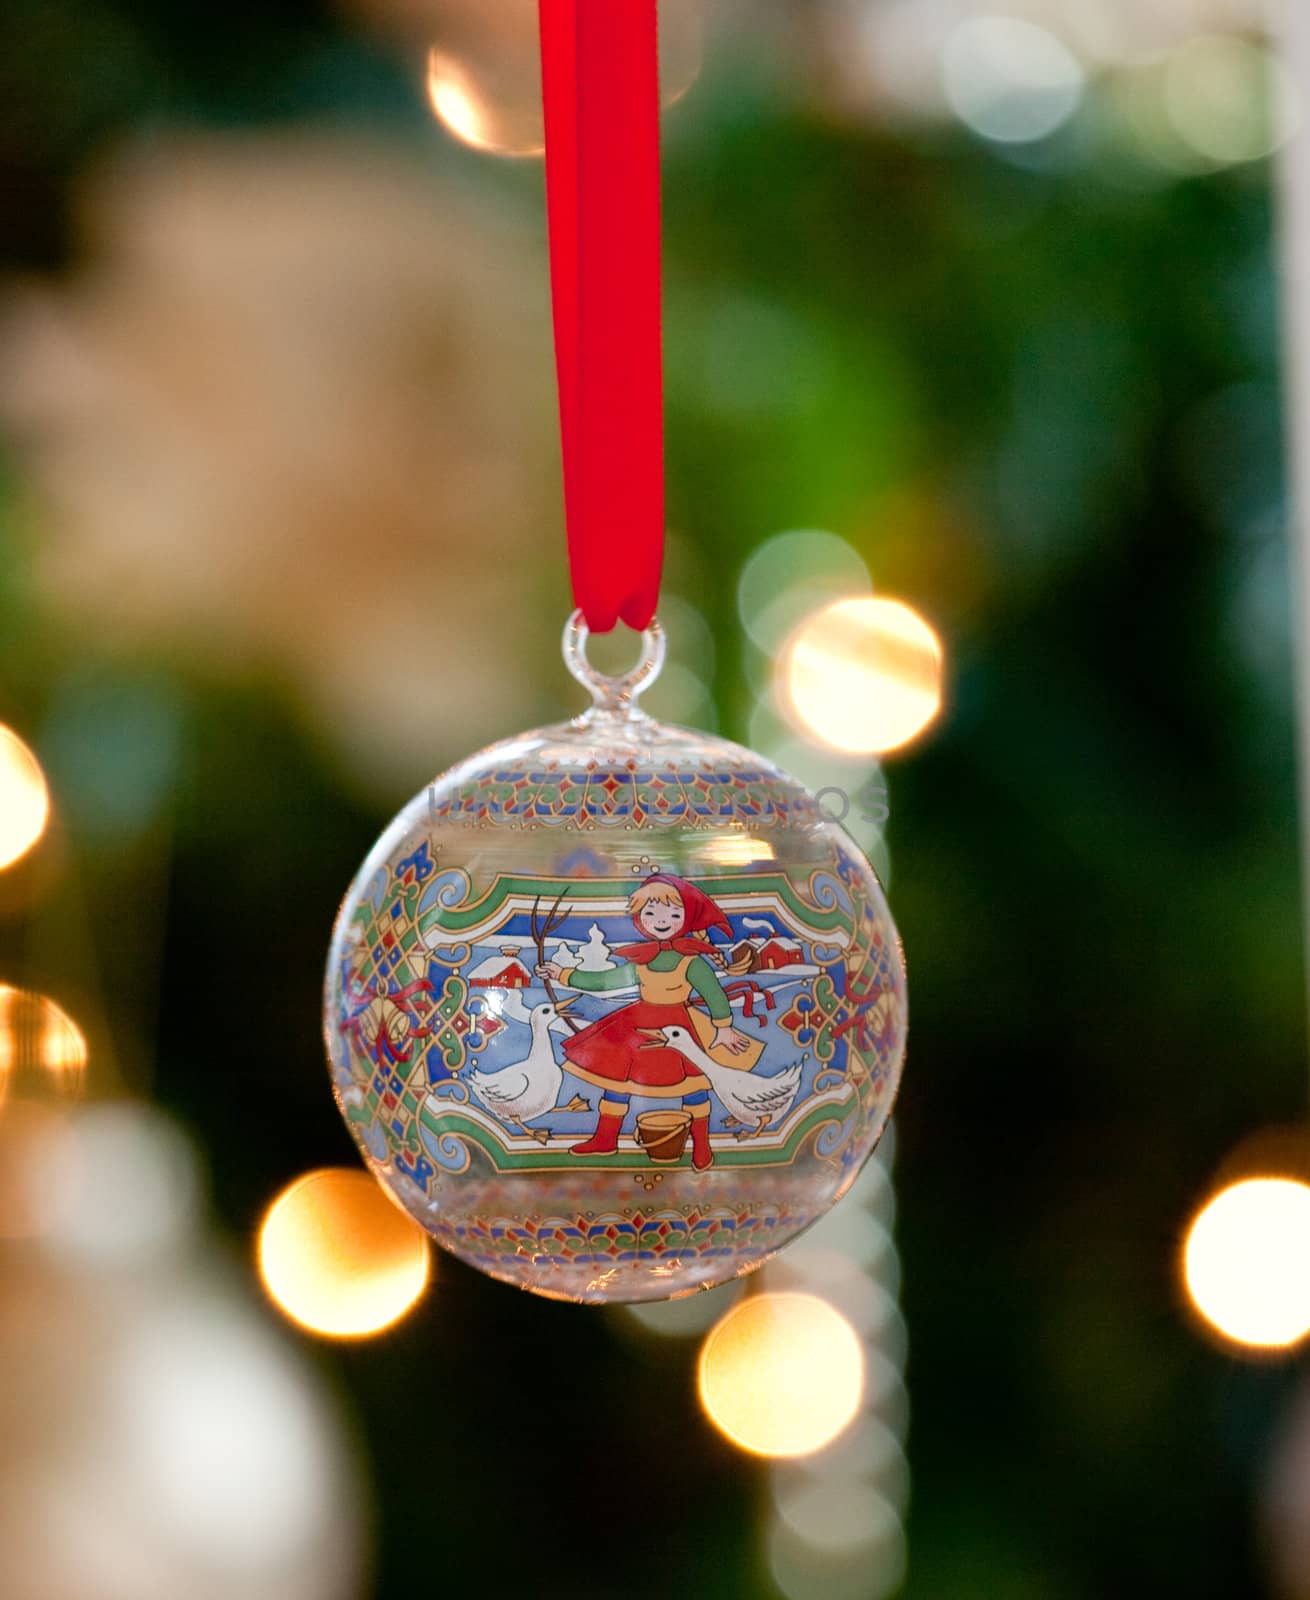 Glass ornament in front of Christmas tree by steheap